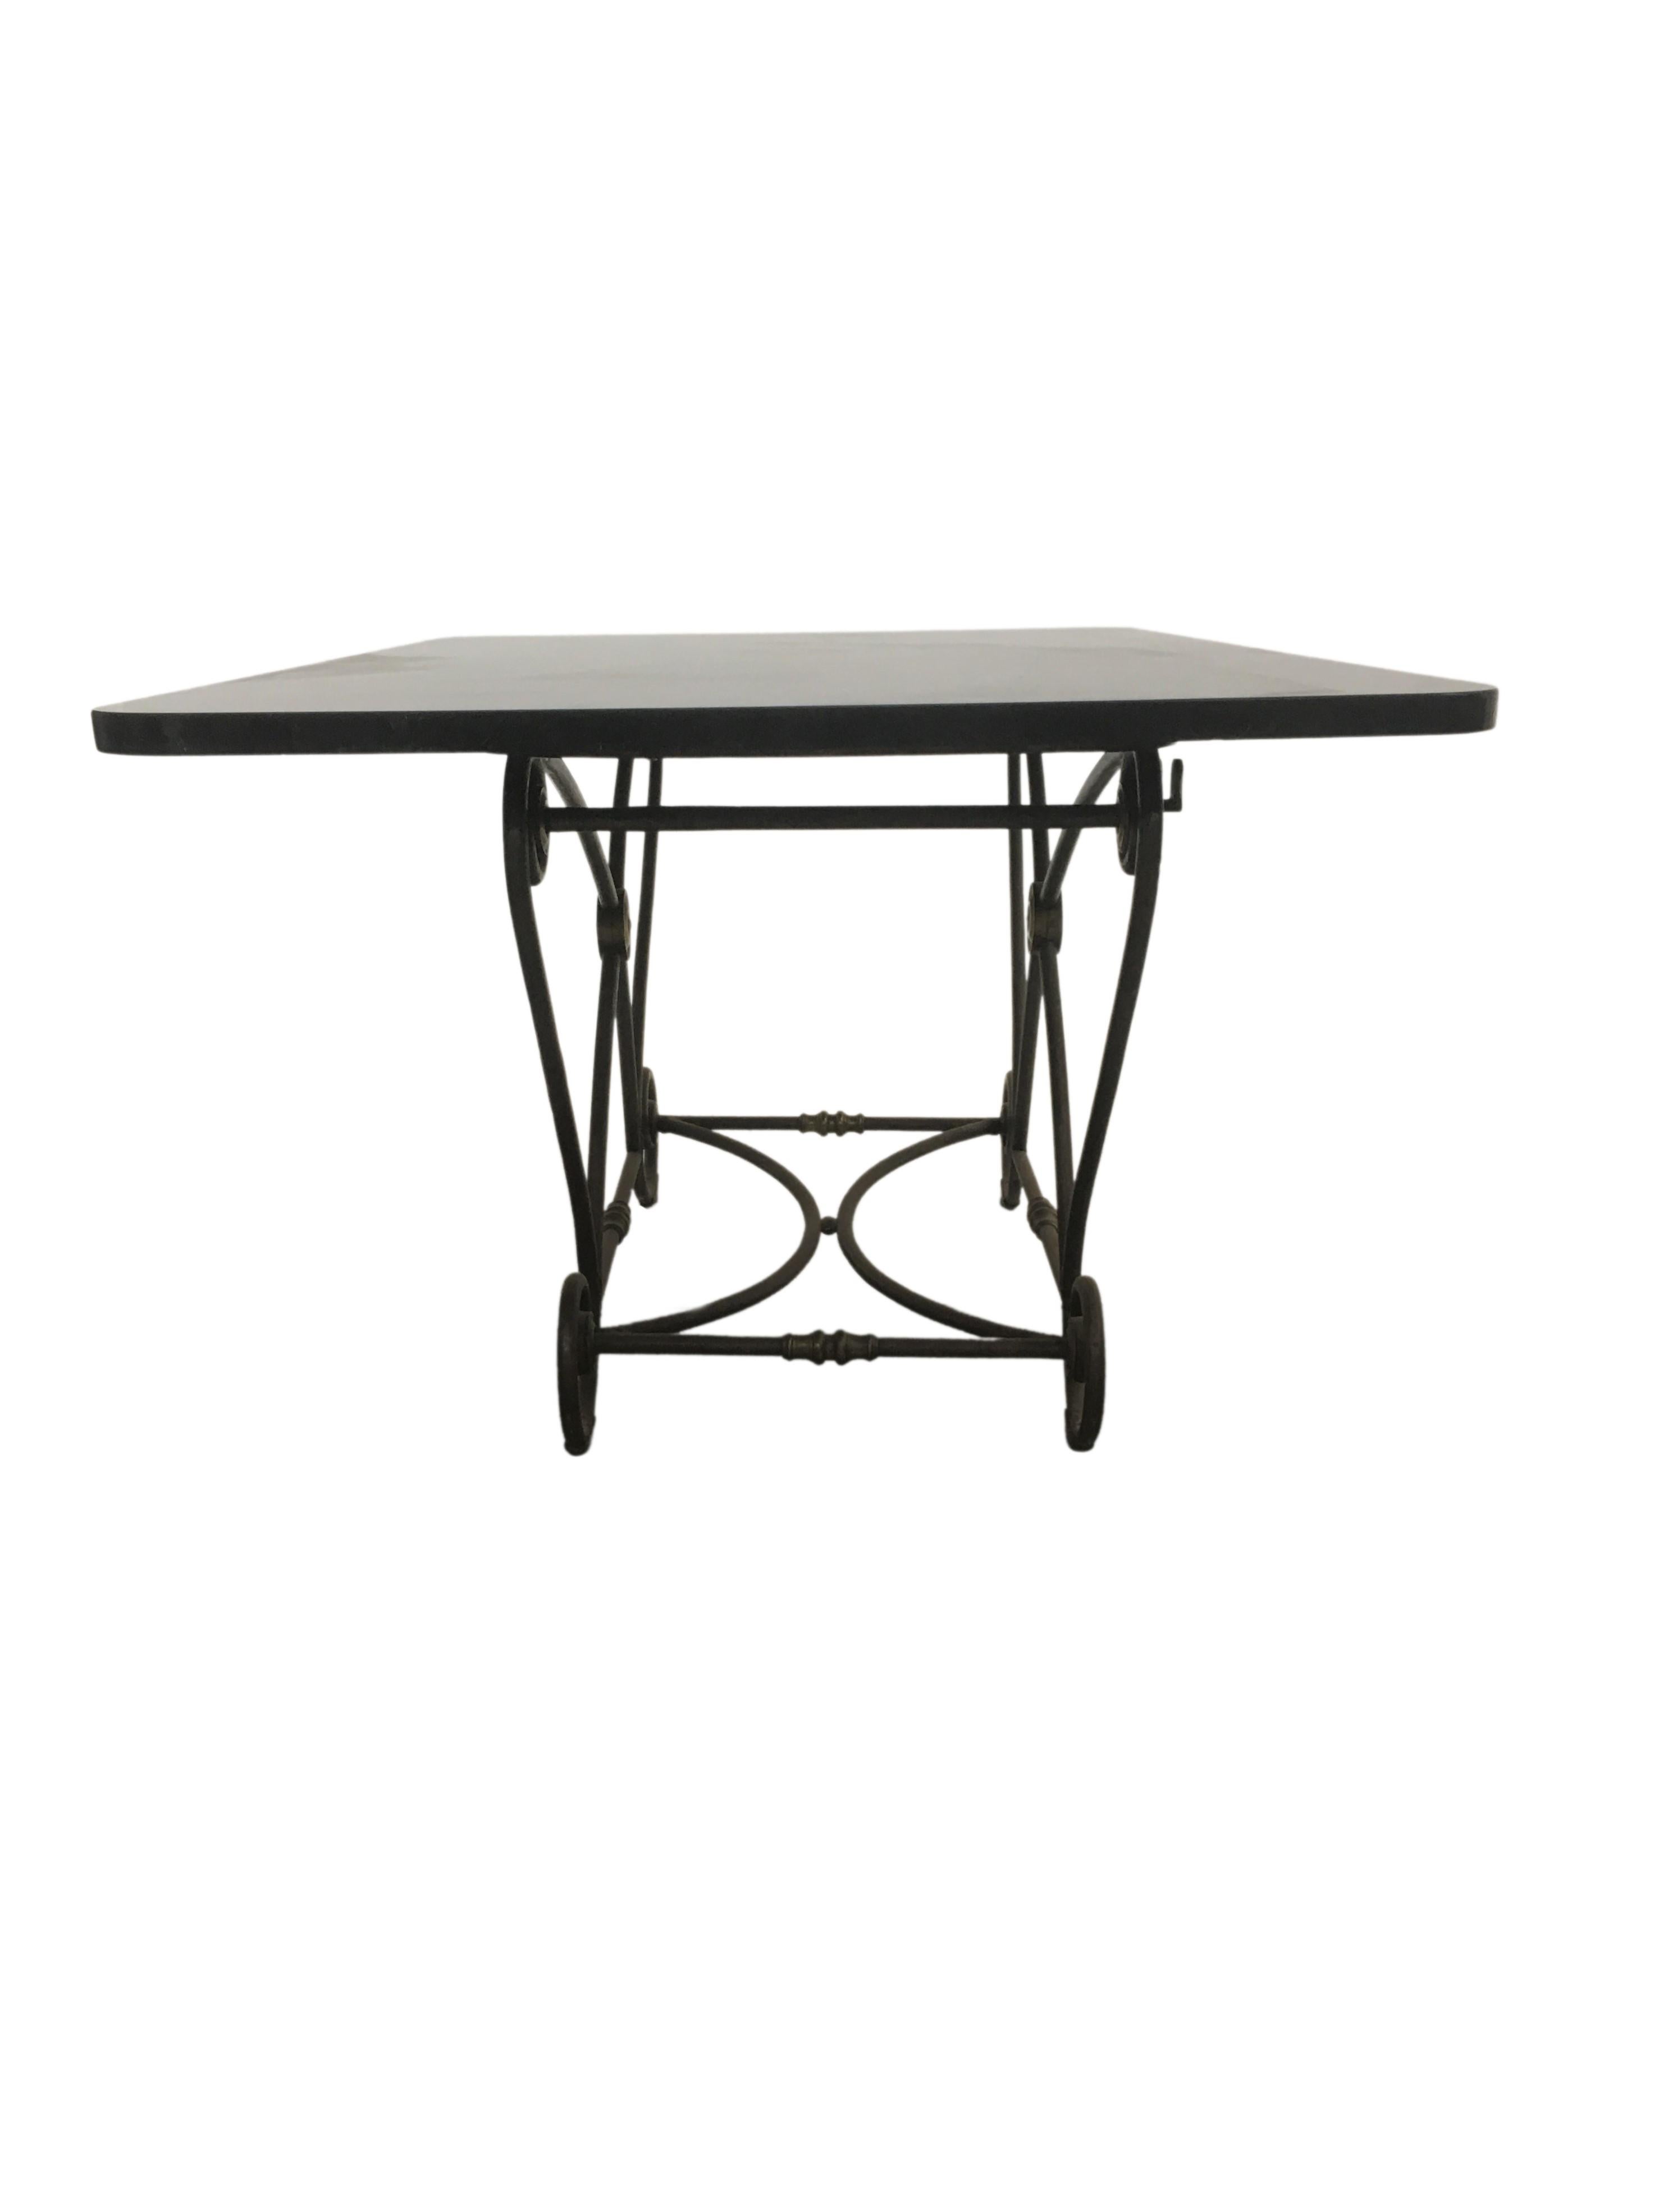 A 1920s dining, or kitchen work table. An iron base with brass decoration medallions finished with a heavy black marble top.